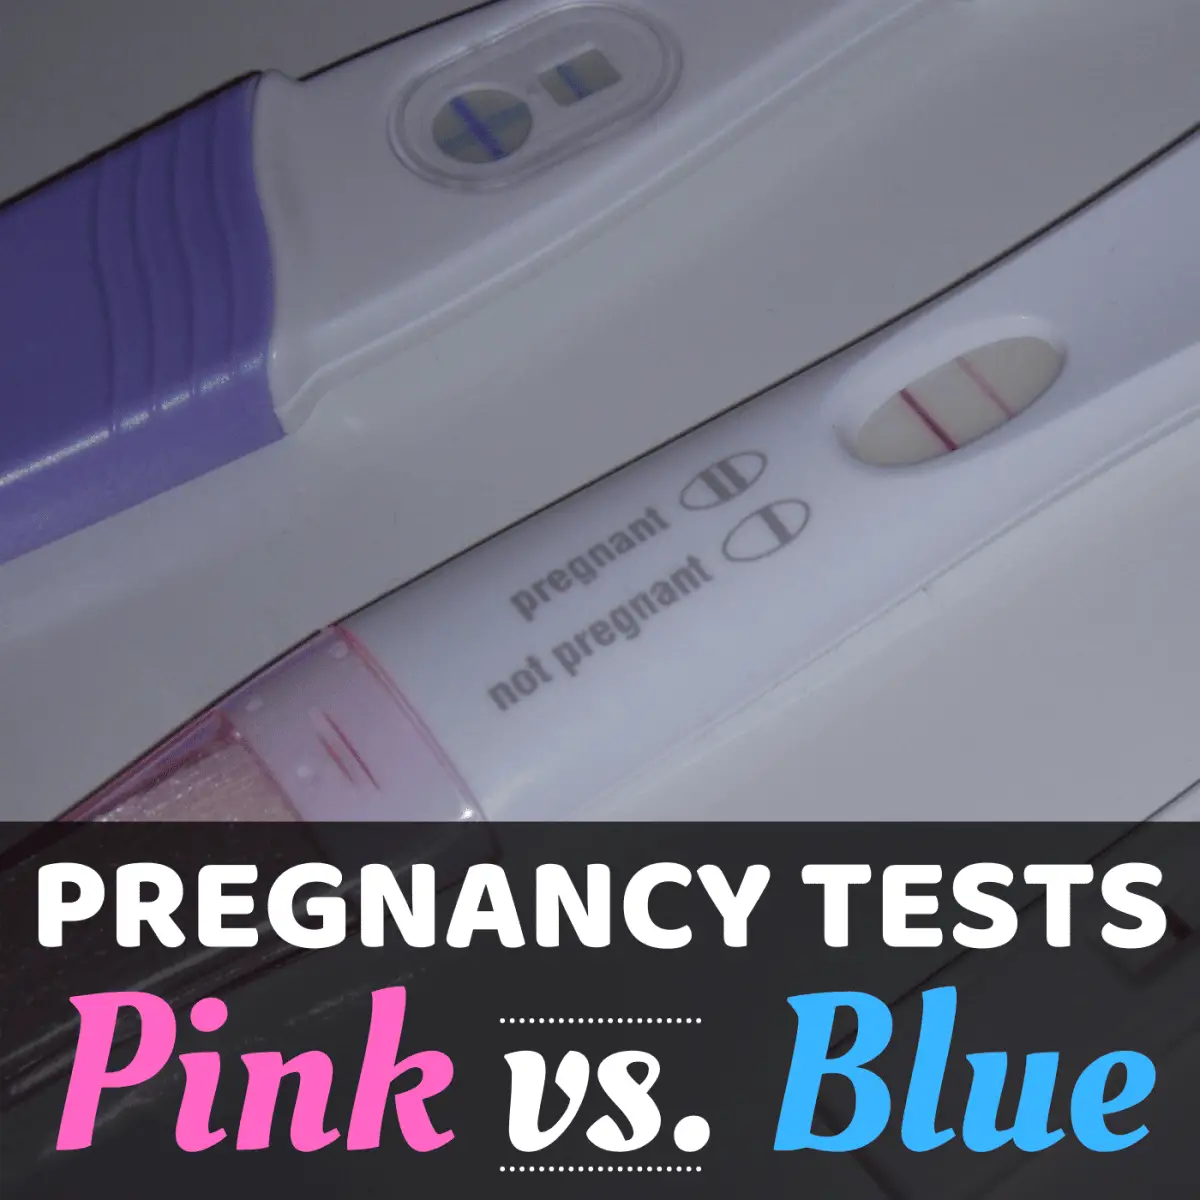 Are Pink or Blue Dye Pregnancy Tests Better?